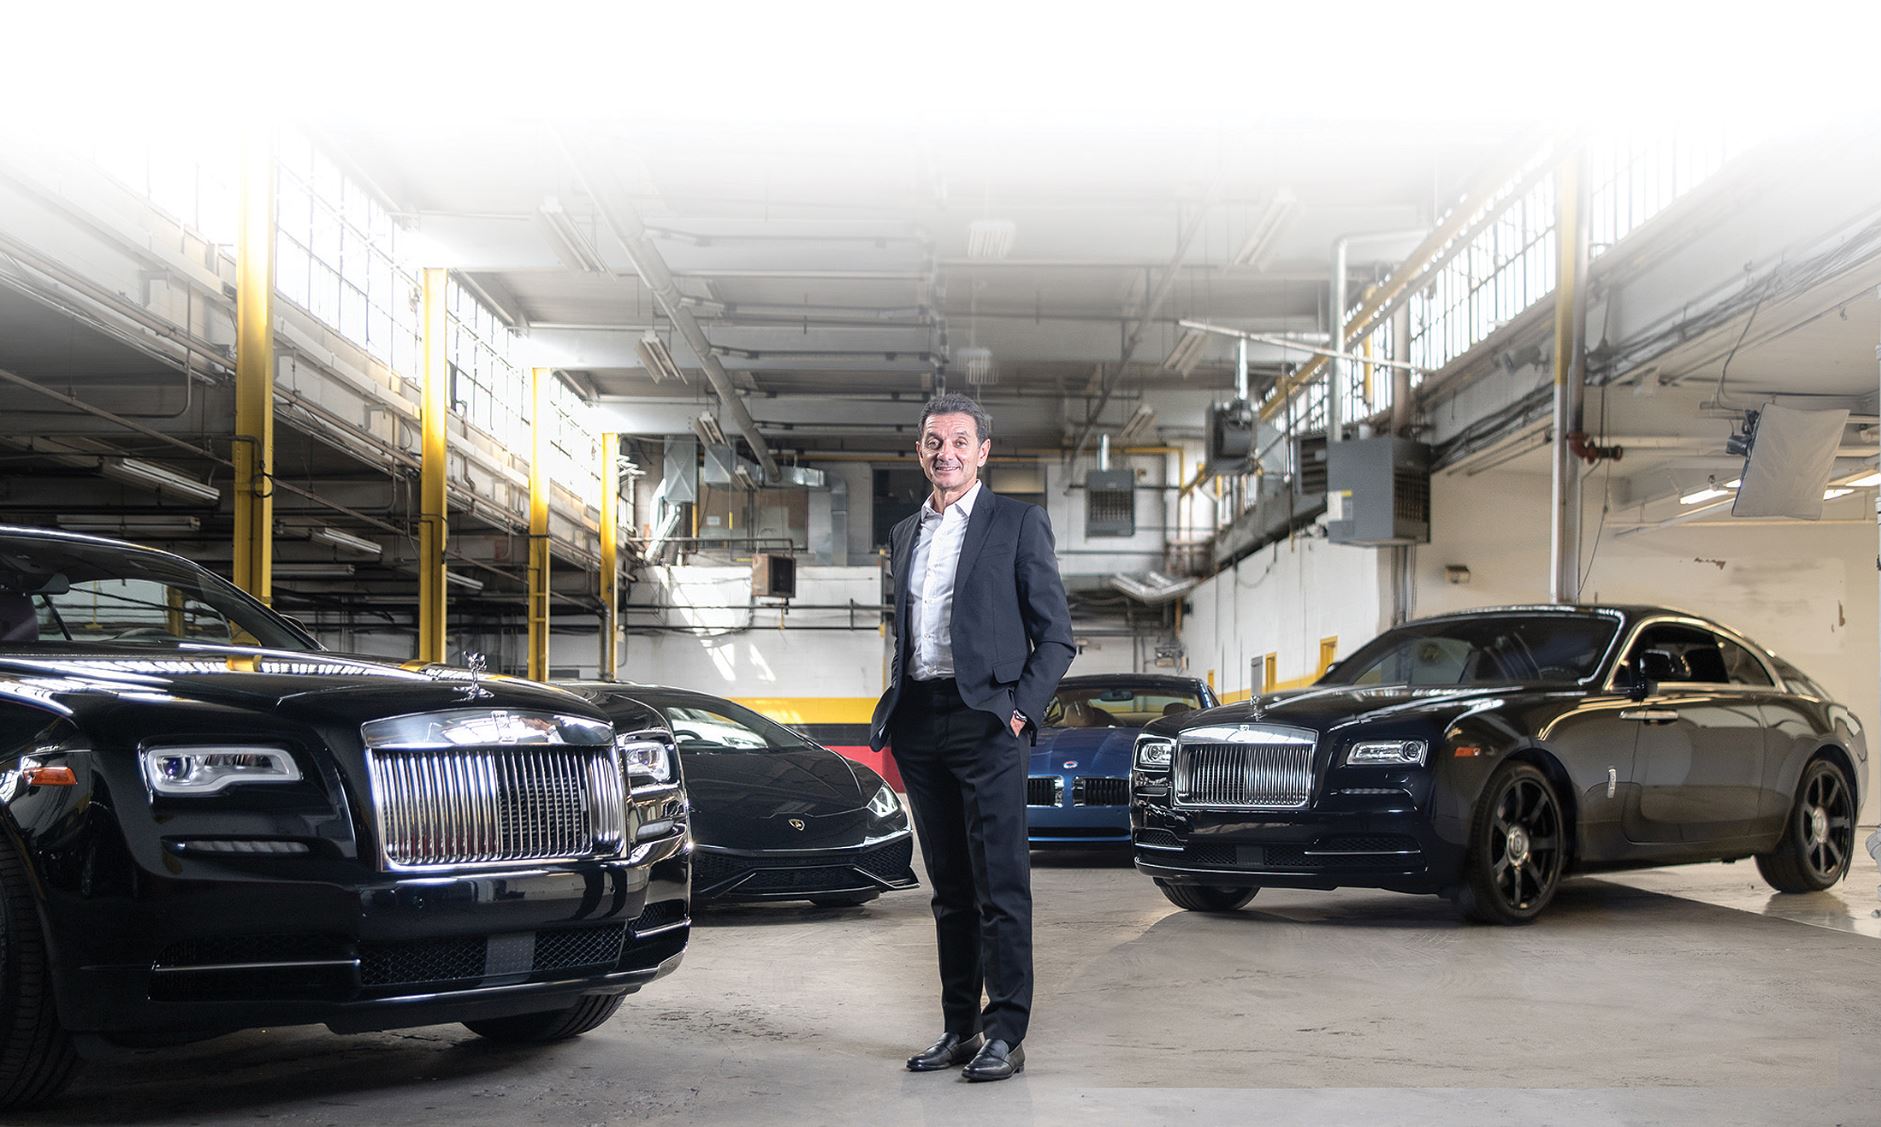 Man stands in front of a fleet of super sports cars